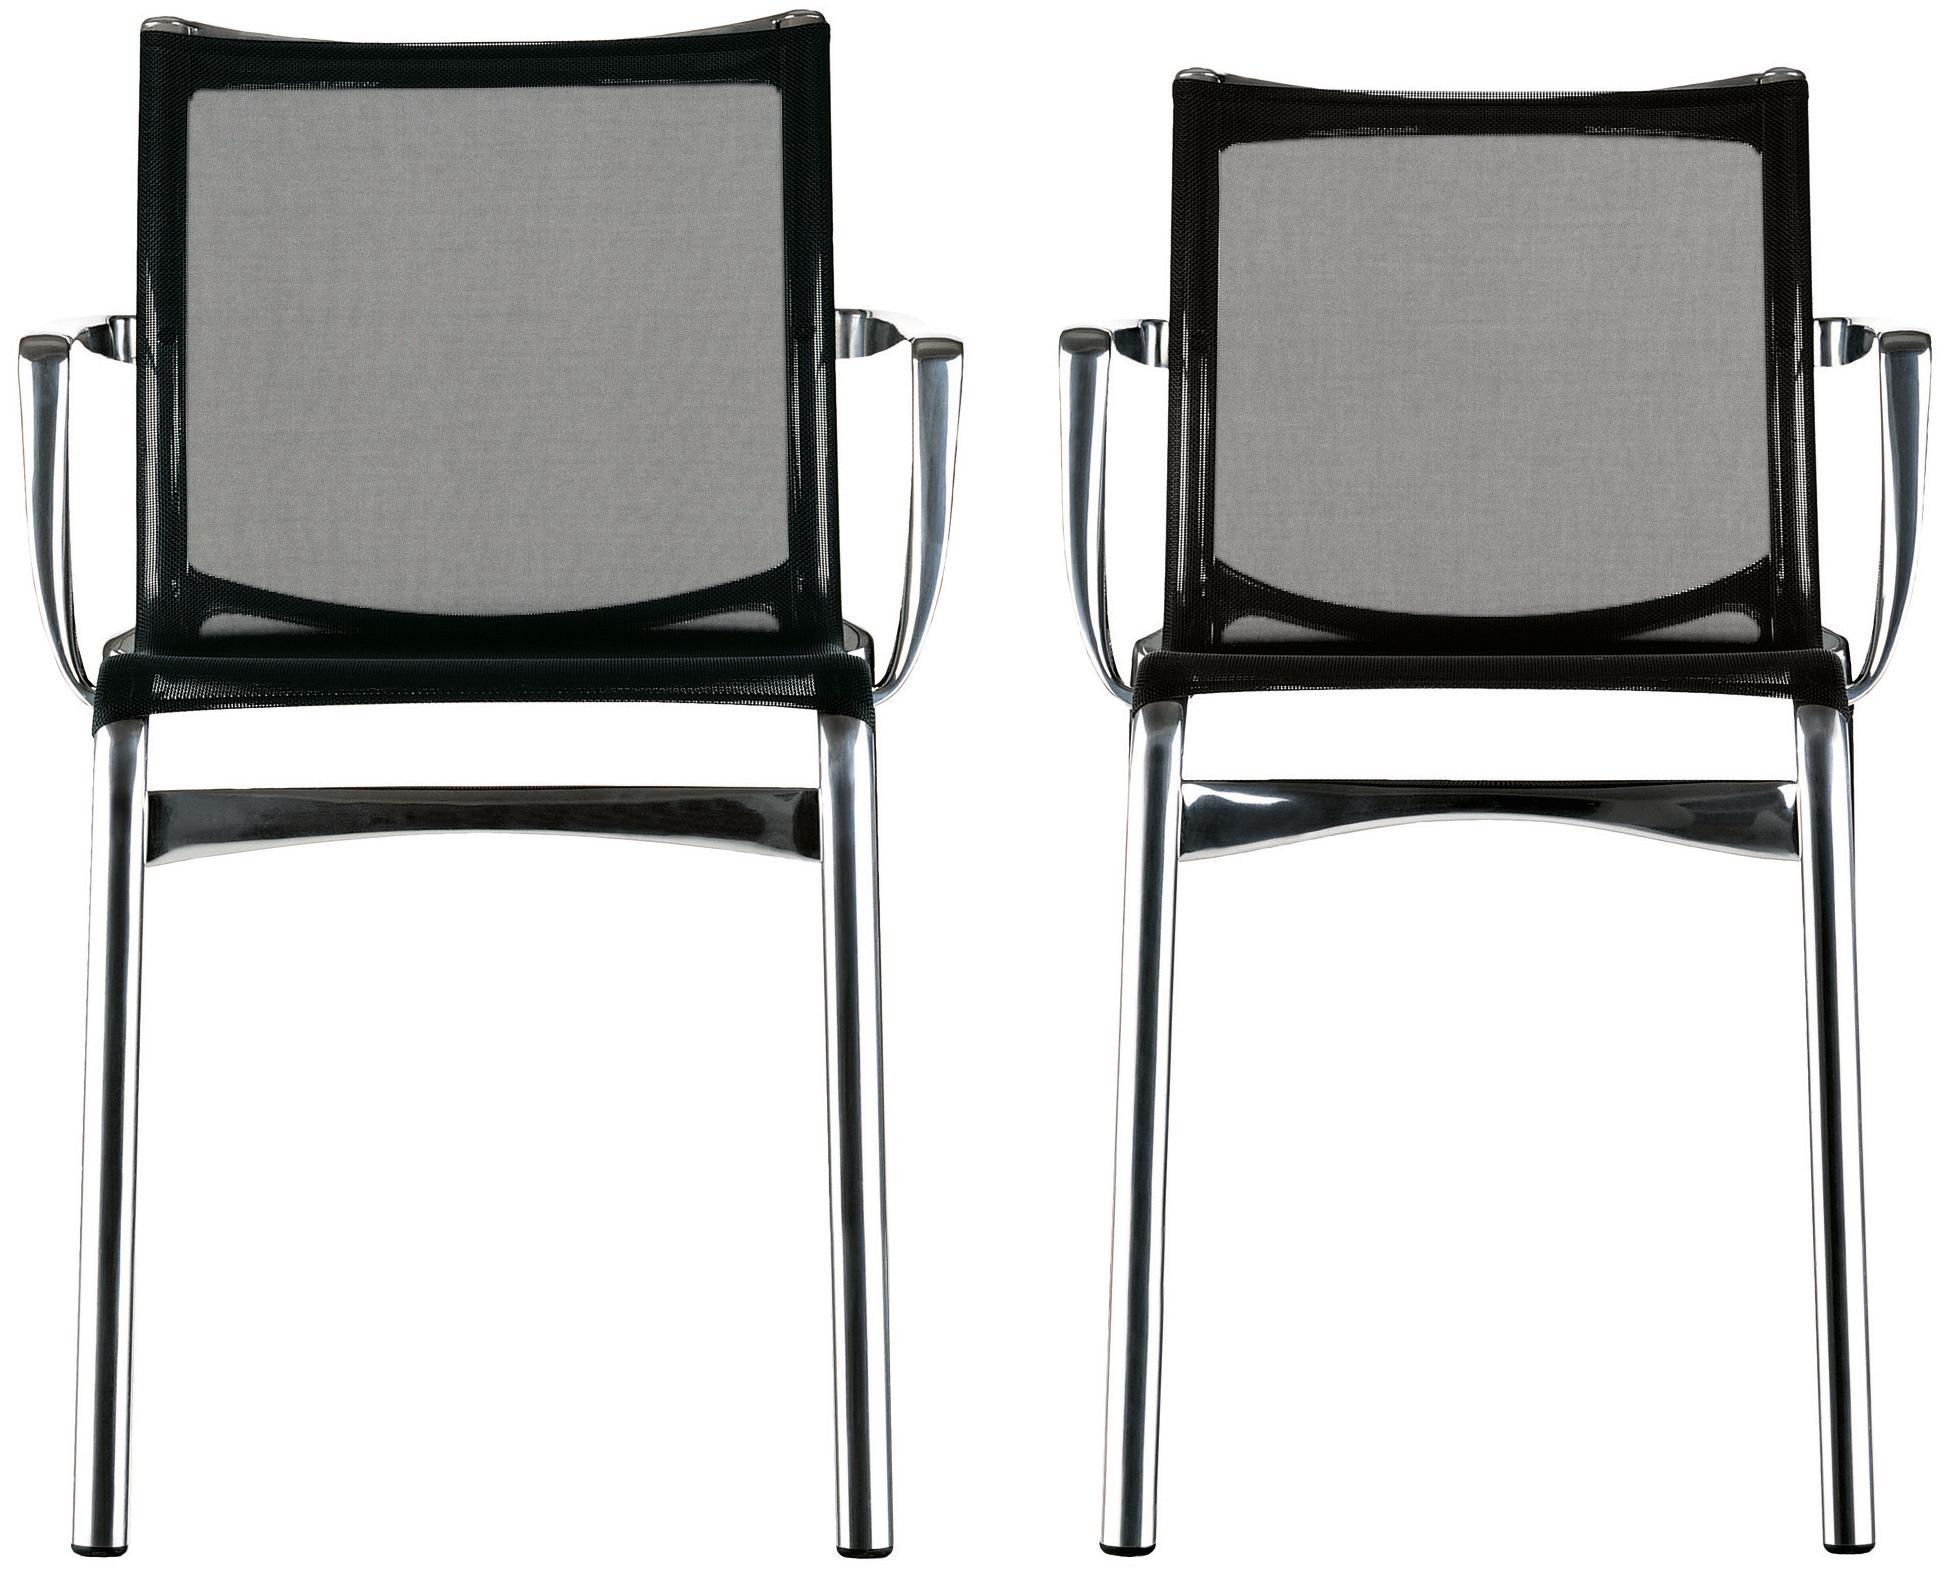 Alias 417 Highframe 40 Chair in Black Mesh Seat with Chromed Aluminium Frame In New Condition For Sale In Brooklyn, NY